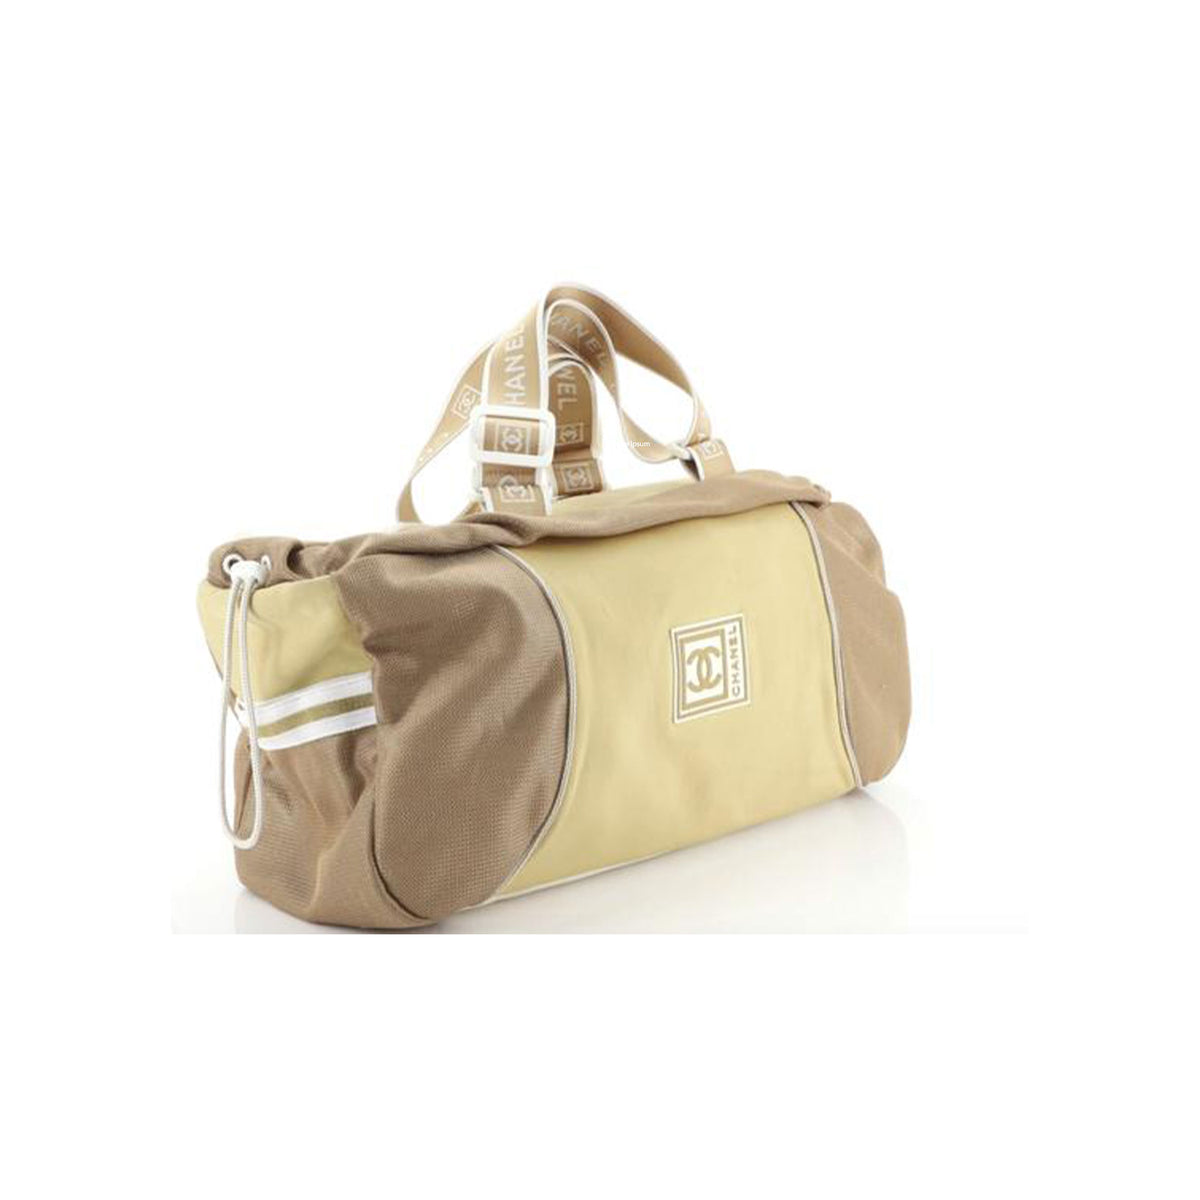 Chanel Duffle Line Boston with Strap Carry-on872825 Beige Nylon